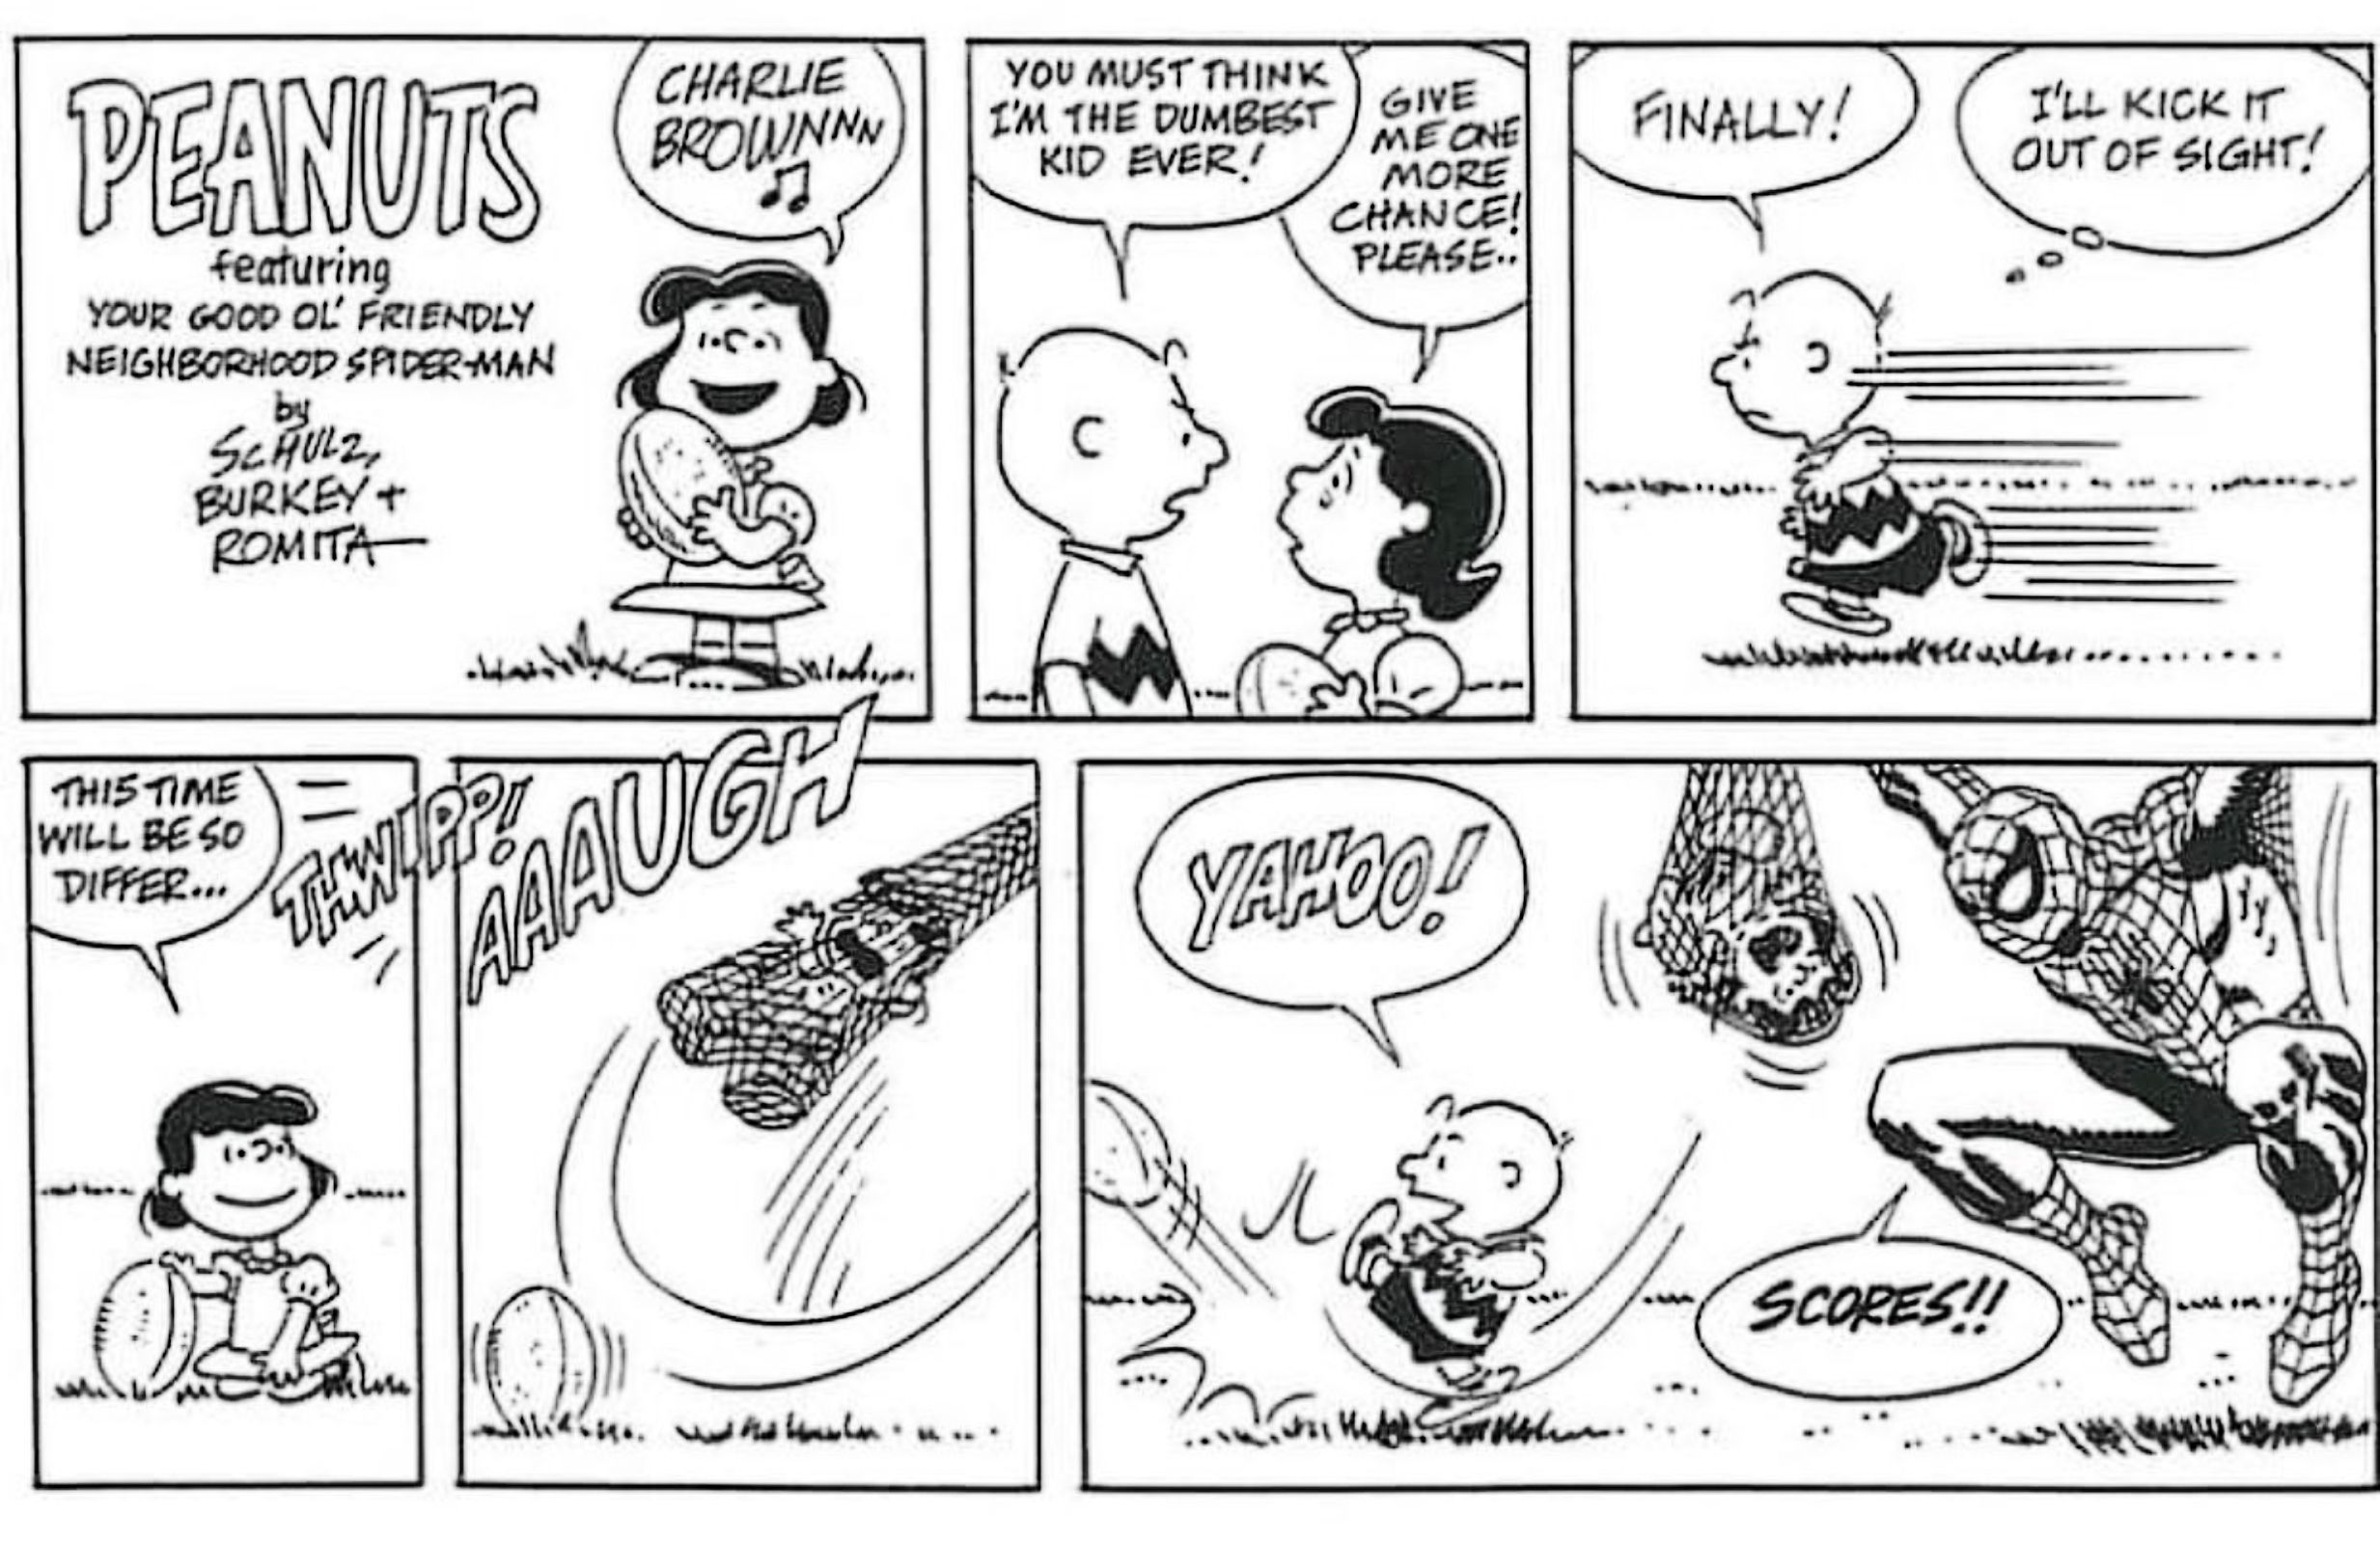 Charlie Brown Finally Kicked the Football in a Bizarre Marvel Crossover